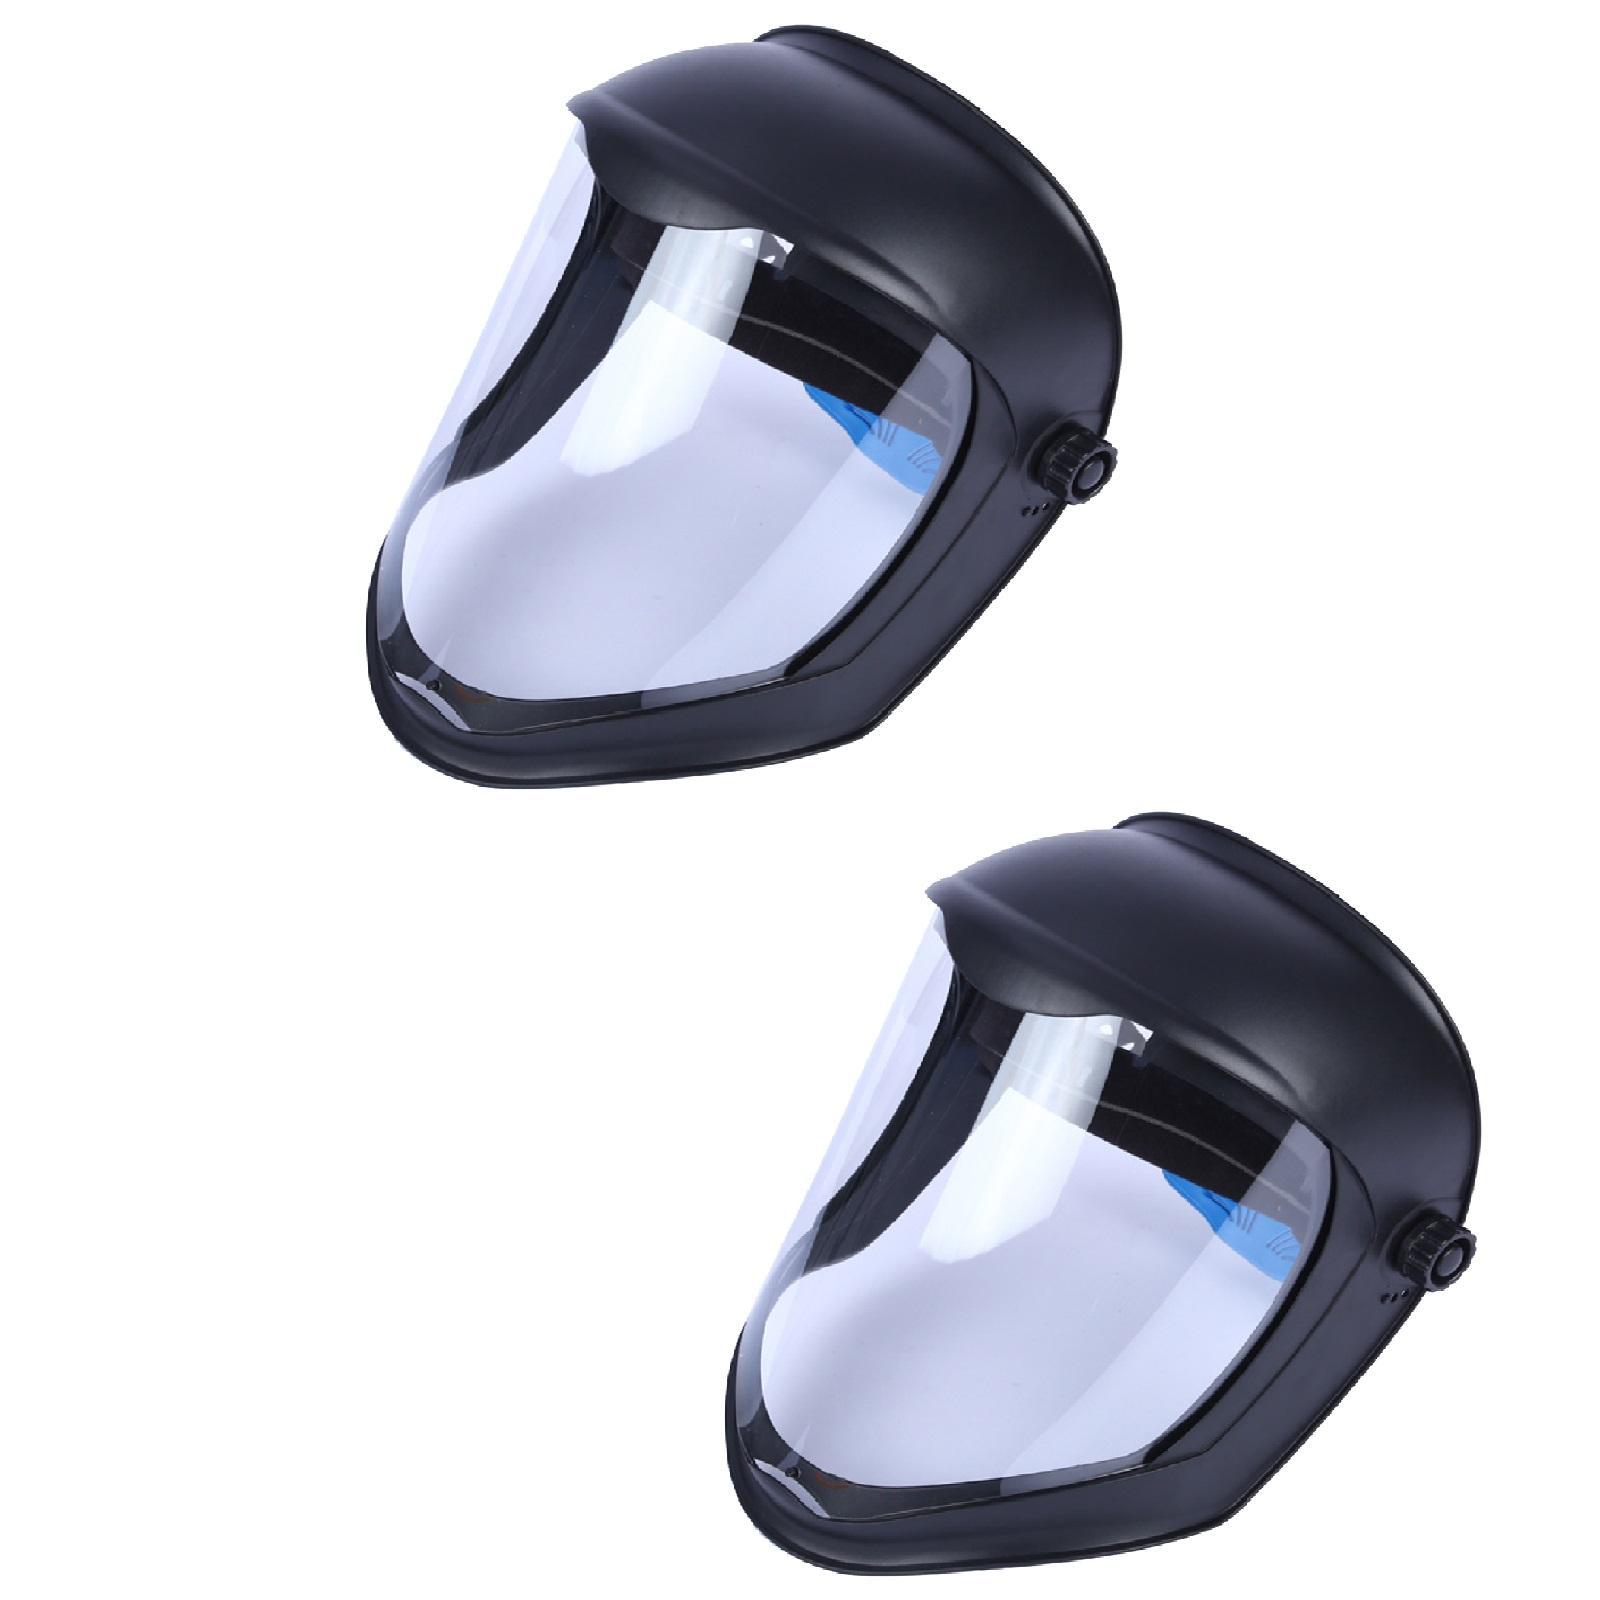 2 Pieces Face Shield Helmet Mask w/Clear Visor Safety Grinding Eye Protect